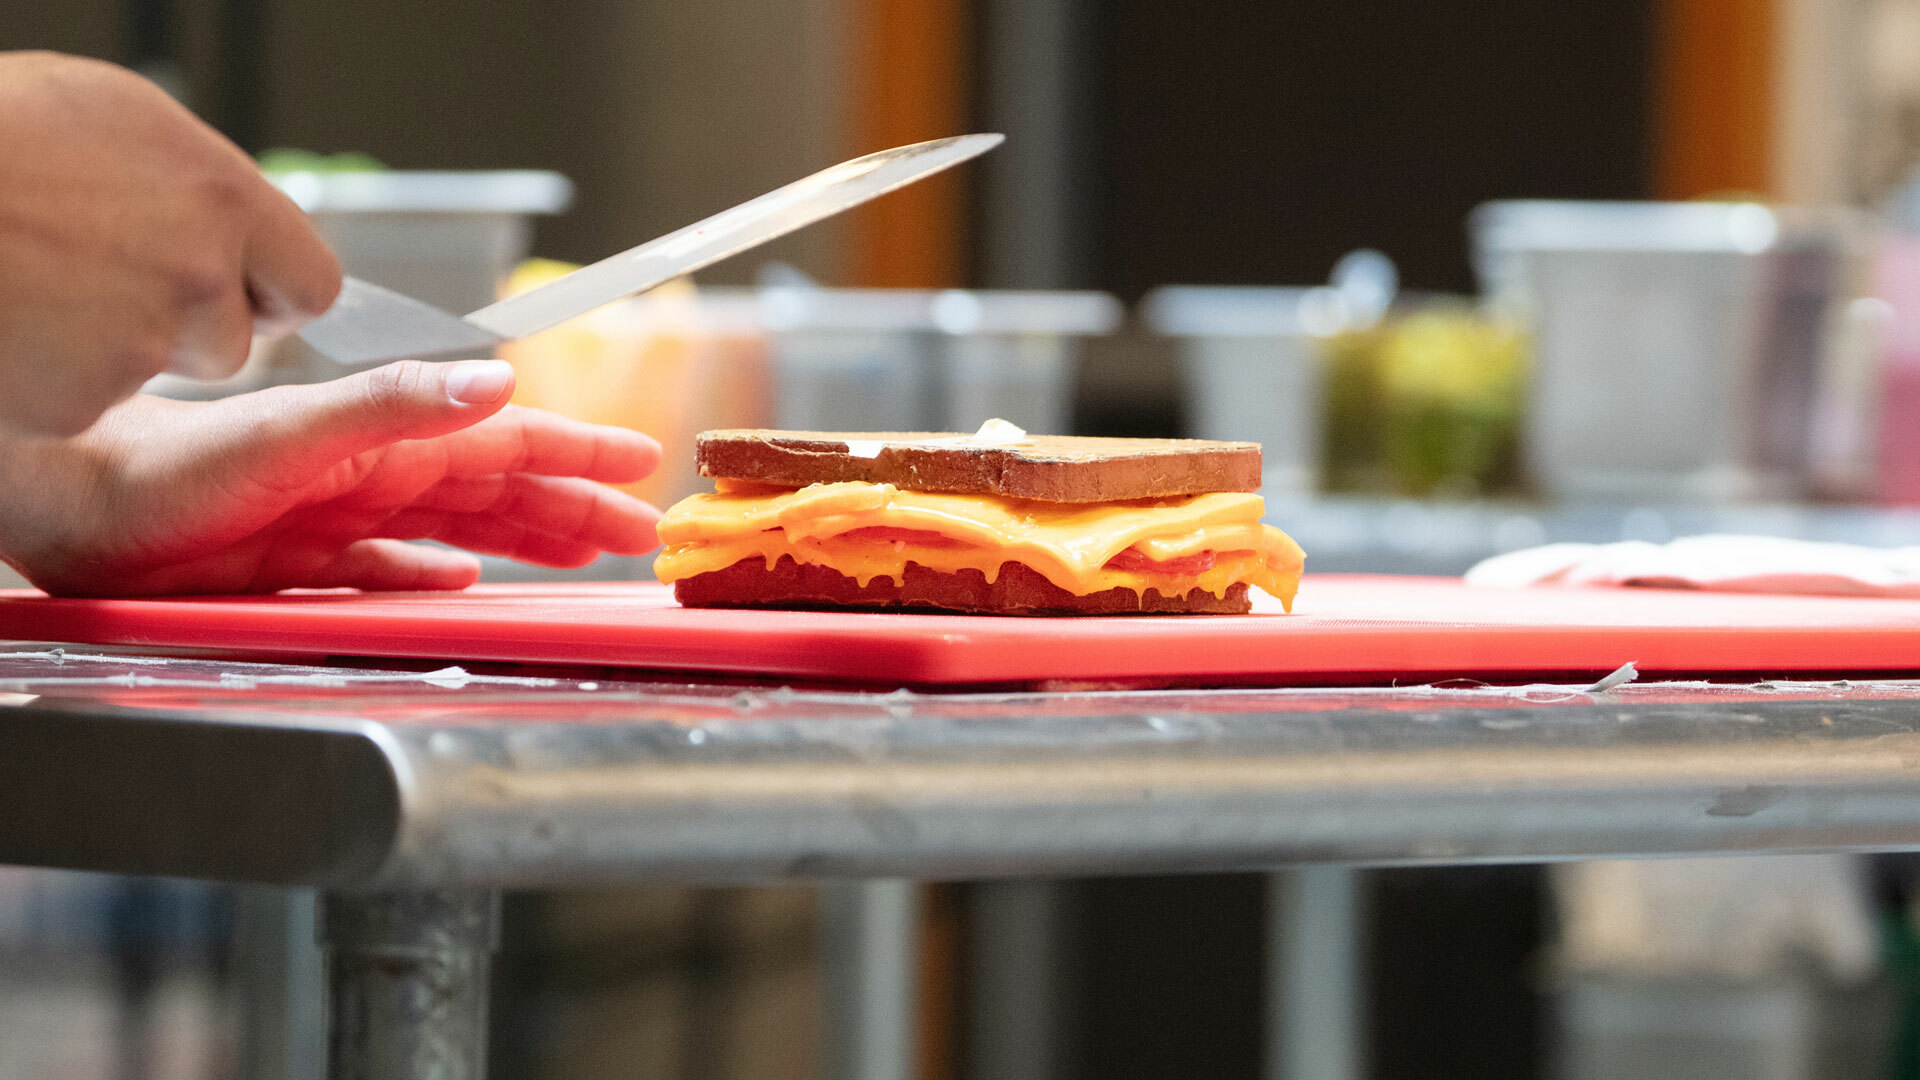 Hands hold a spatula over a prop sandwich with realistic bread and melted cheese slices resting atop a red cutting board on a metal table.